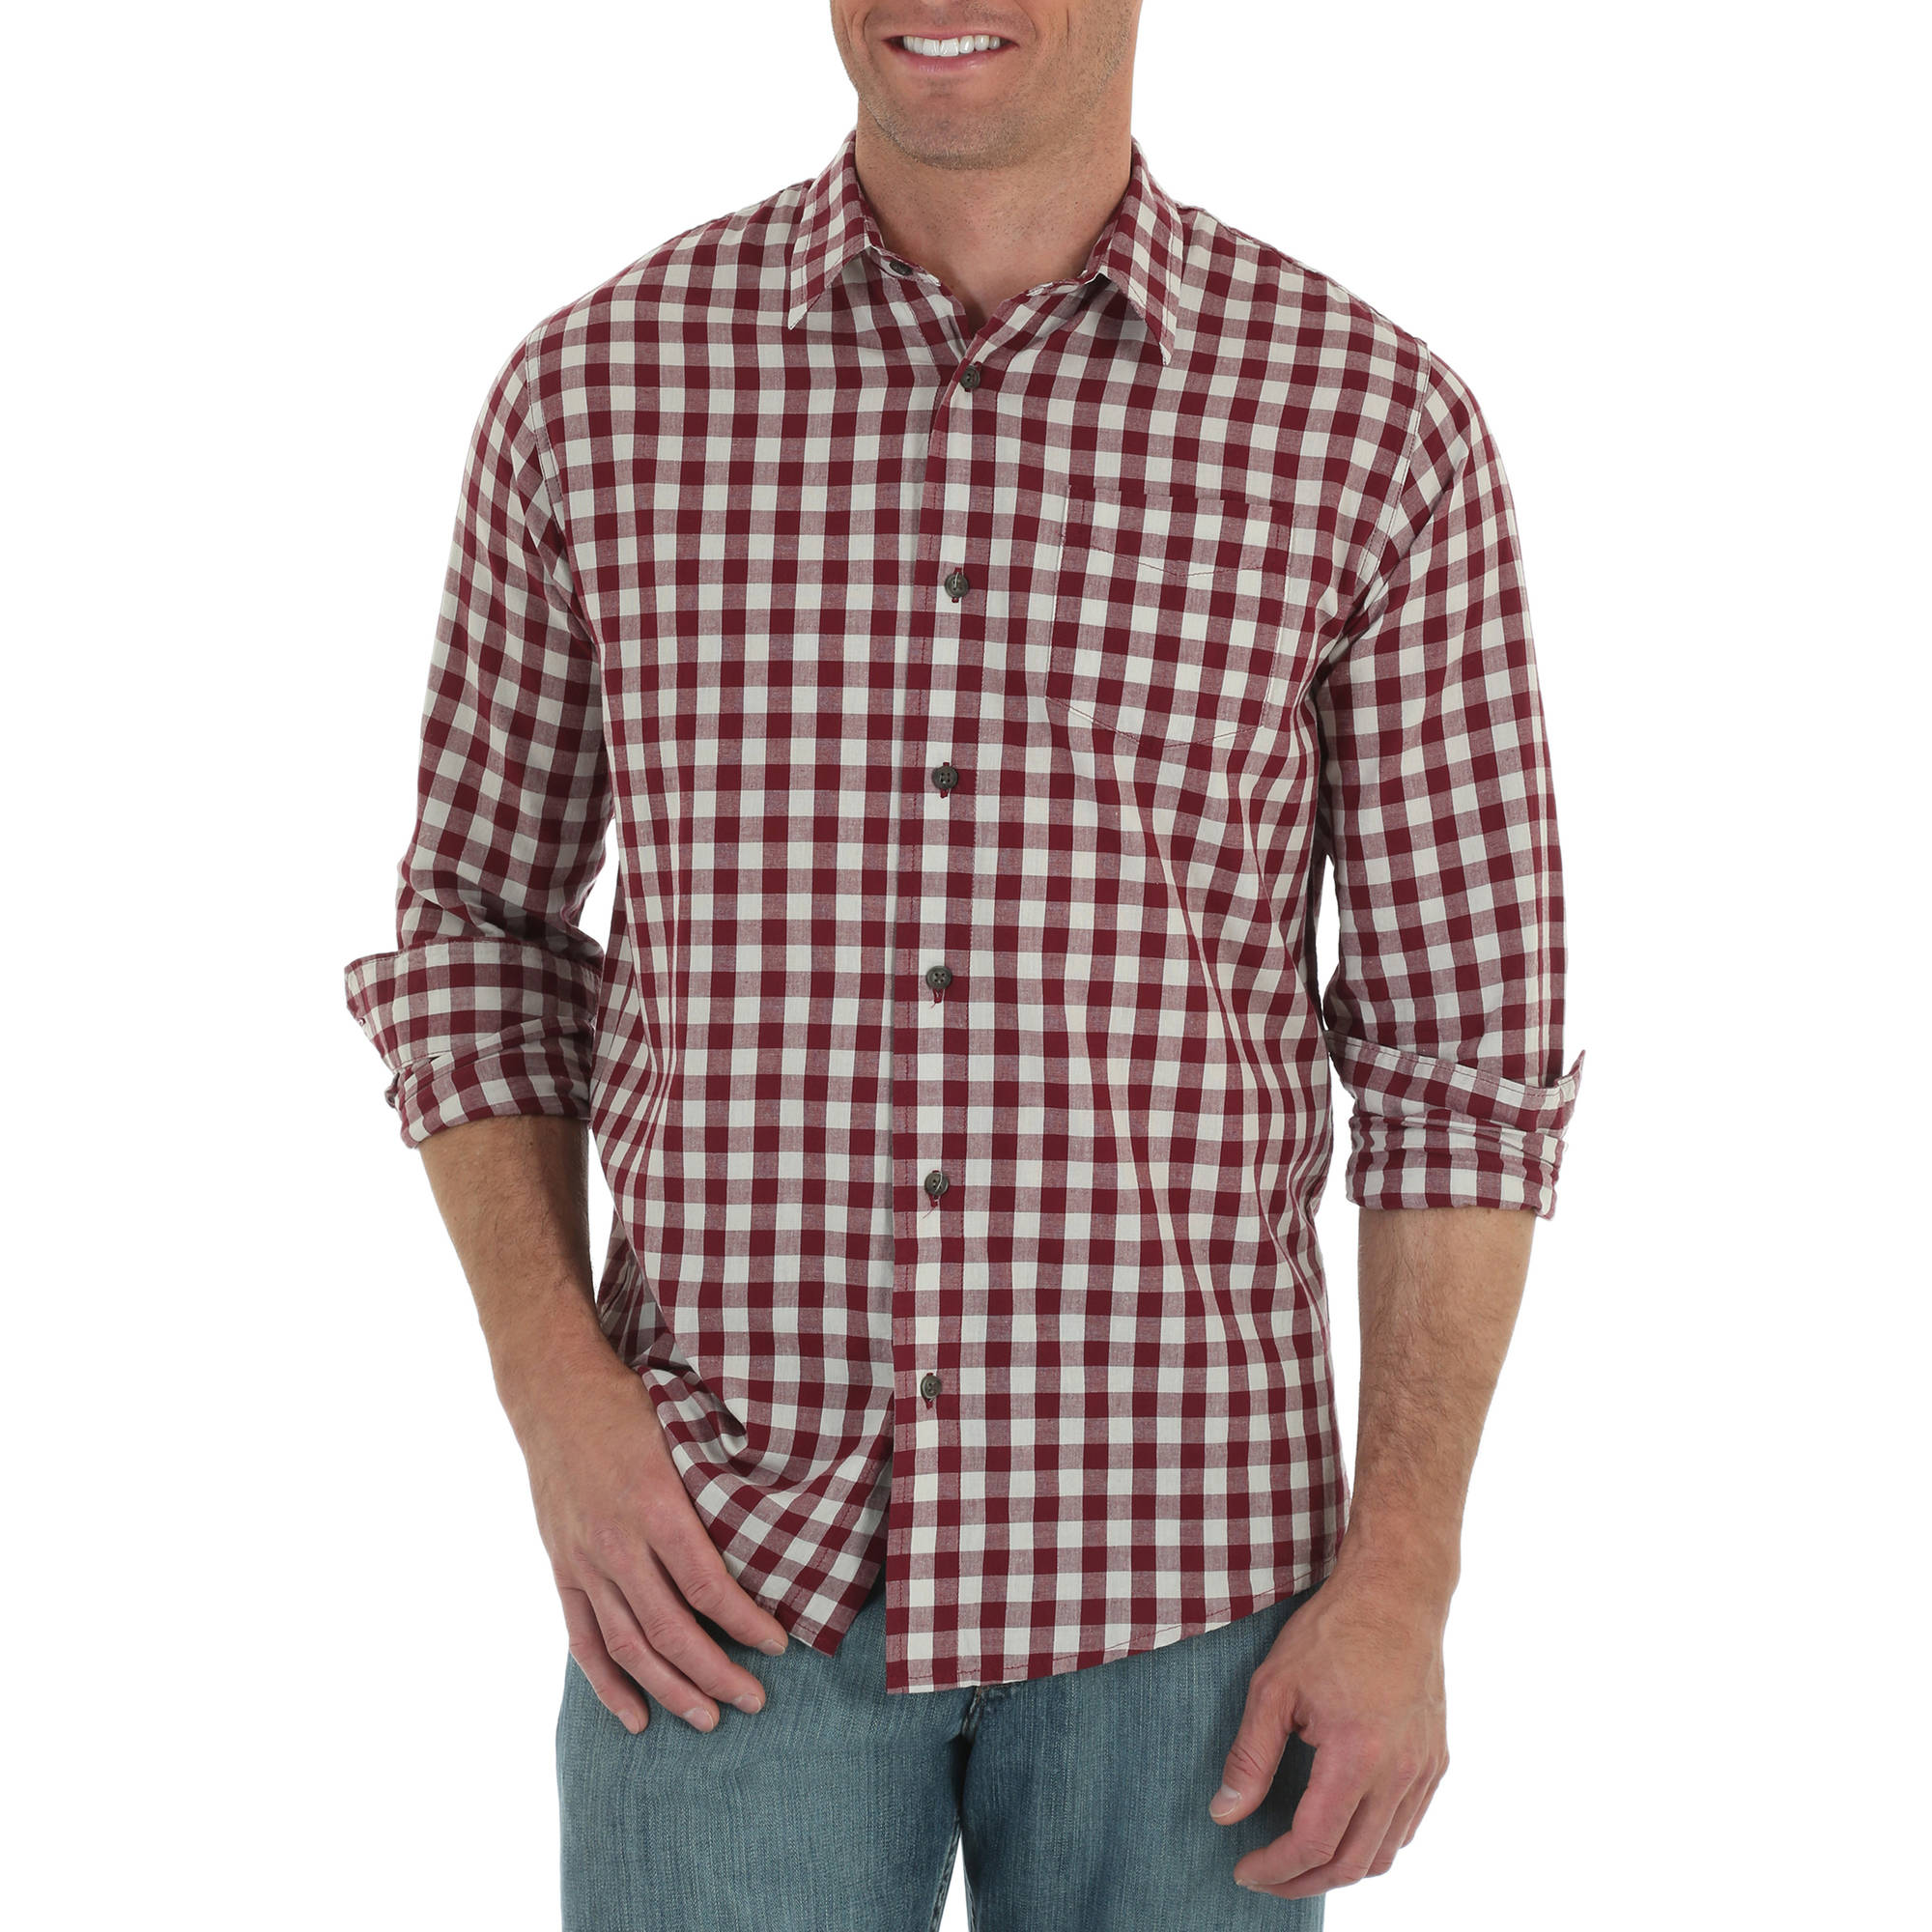 Jeans Co. Men's Long Sleeve Woven Shirt - image 1 of 2